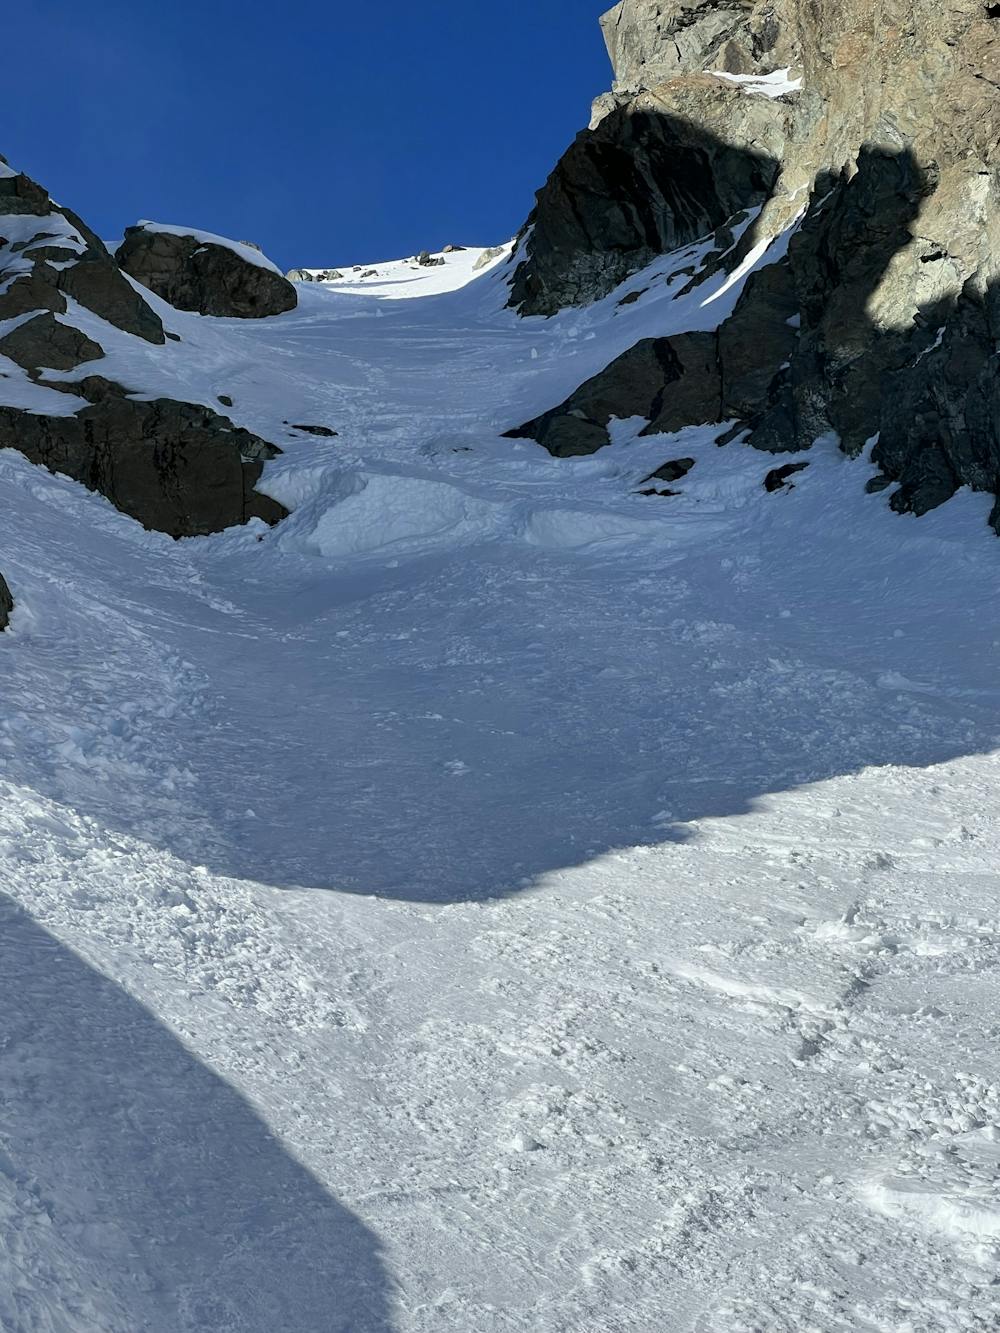 The couloir with our tracks